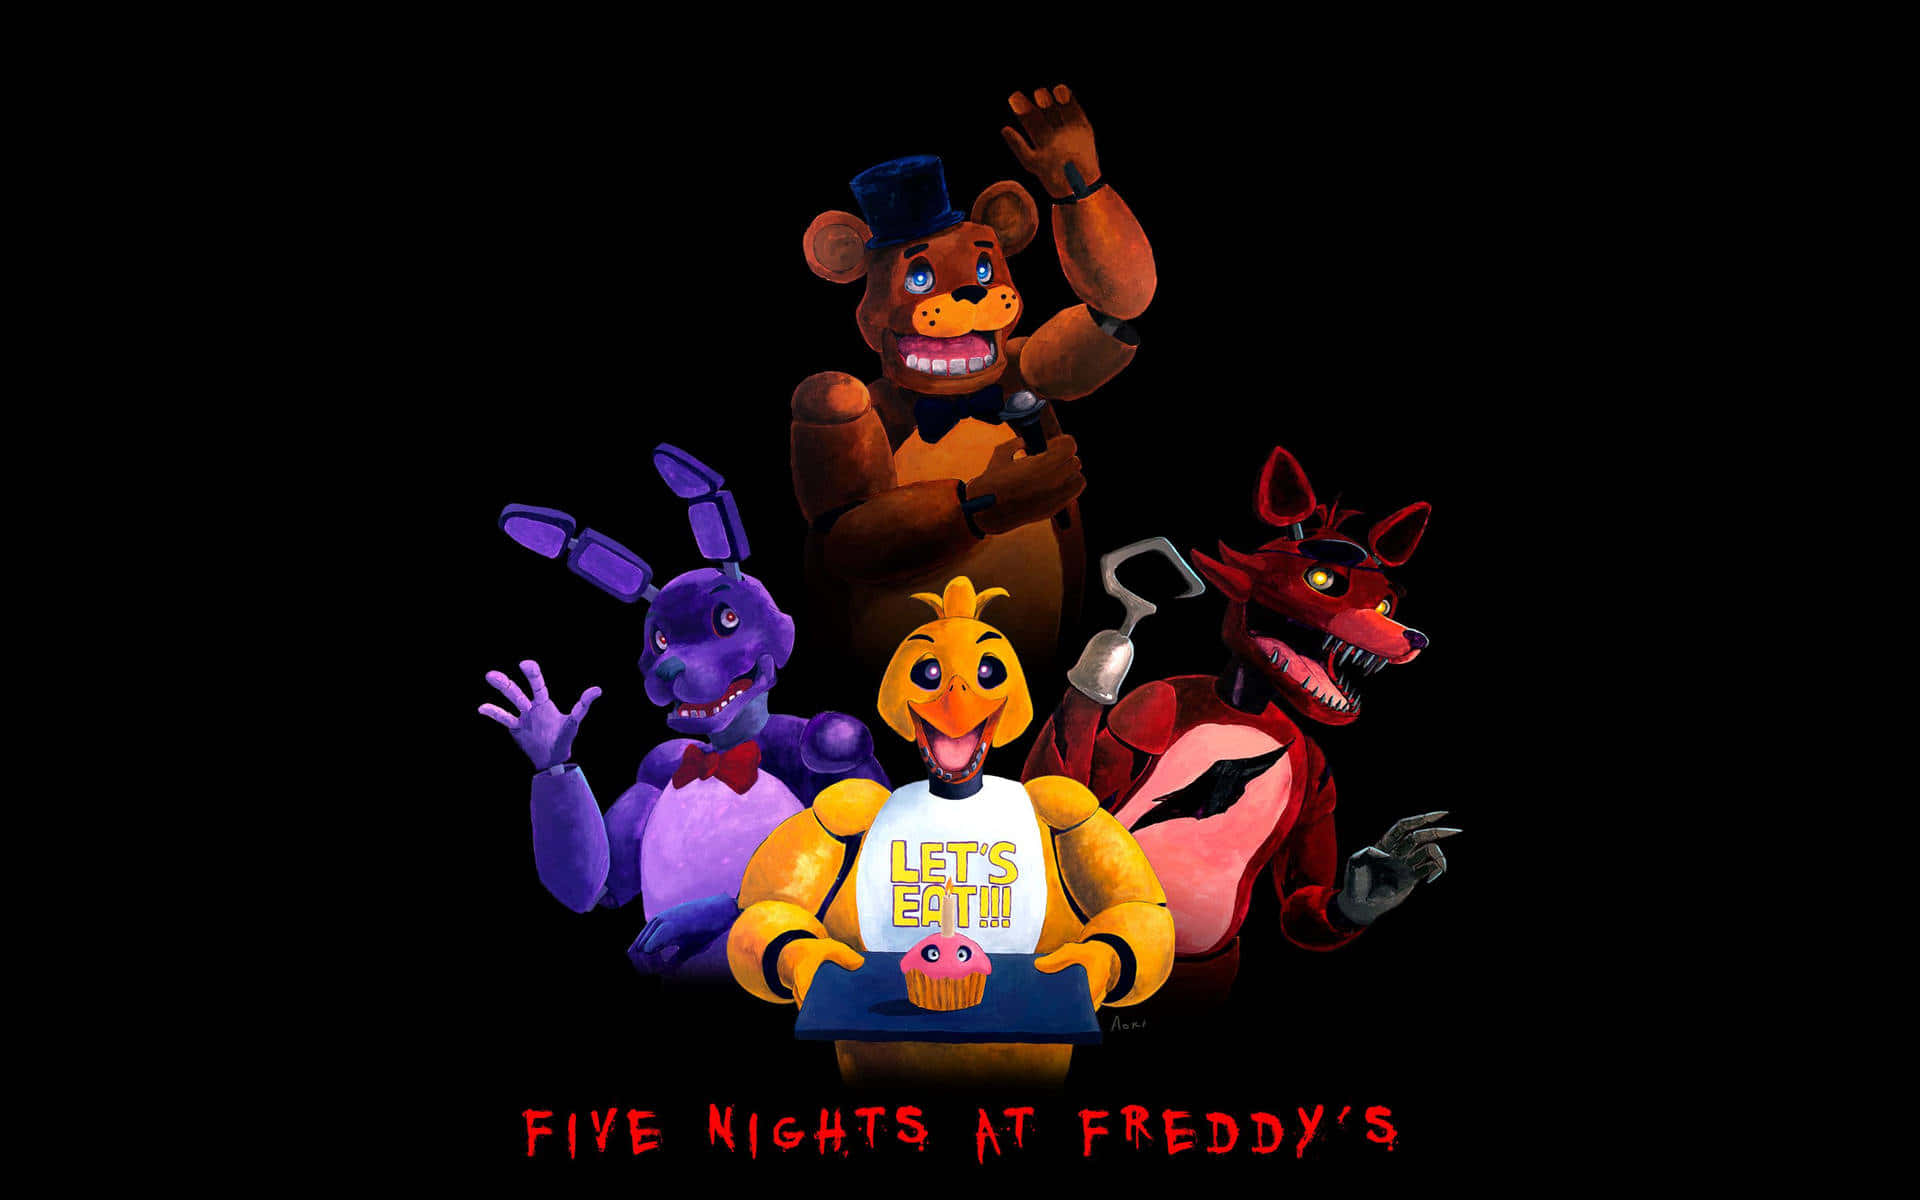 Fun And Adventure With Cutefnaf! Wallpaper